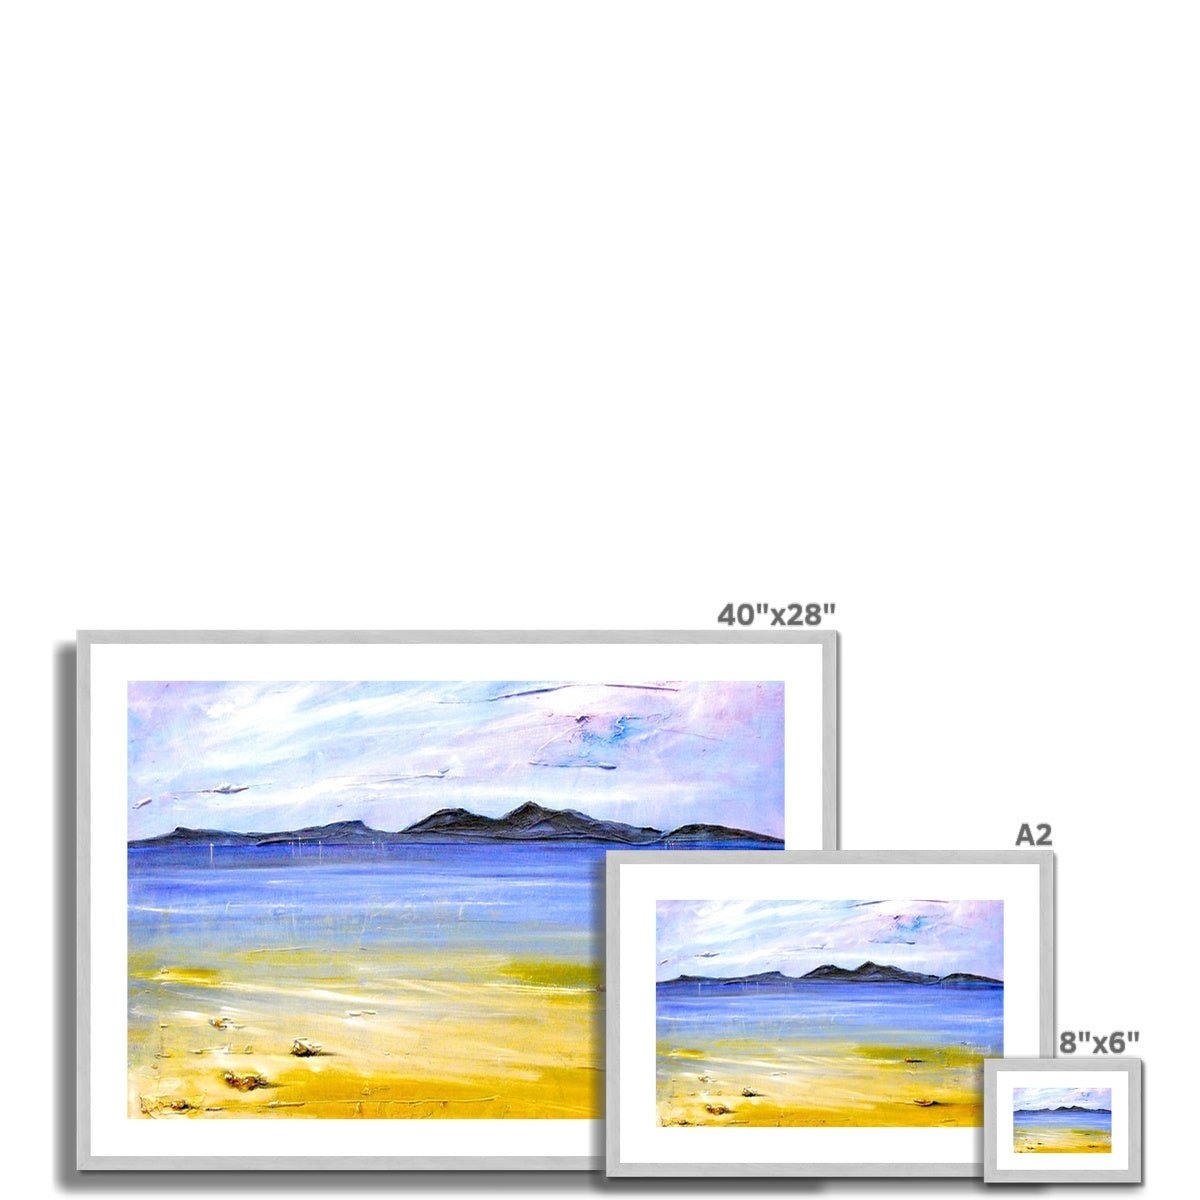 Camusdarach Beach Arisaig Painting | Antique Framed & Mounted Prints From Scotland-Antique Framed & Mounted Prints-Scottish Highlands & Lowlands Art Gallery-Paintings, Prints, Homeware, Art Gifts From Scotland By Scottish Artist Kevin Hunter